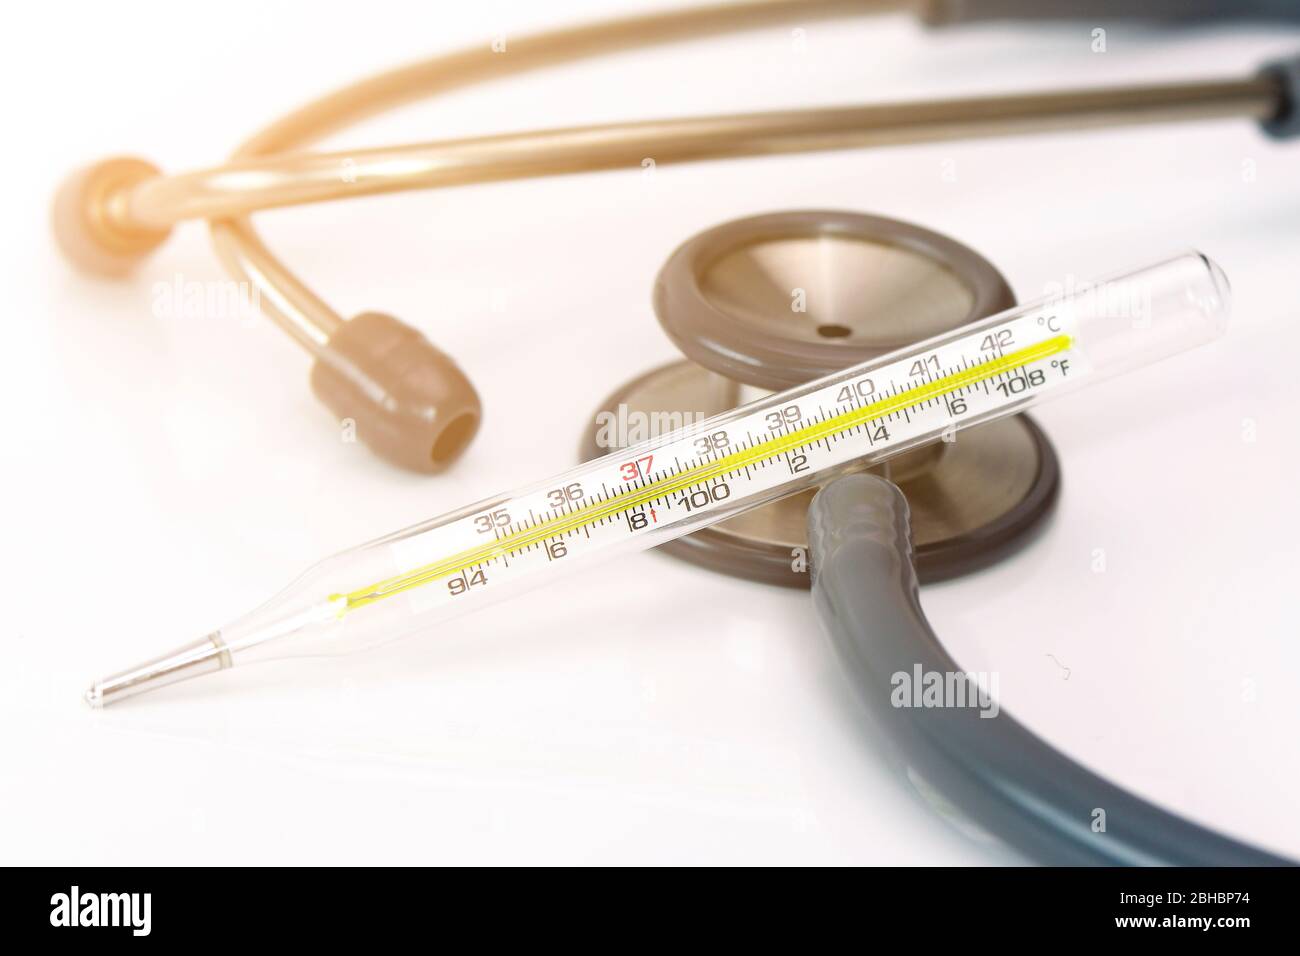 Oral thermometer and stethoscope on white background with warm light tone in concept of early detect COVID-19 infection with body temperature measurem Stock Photo